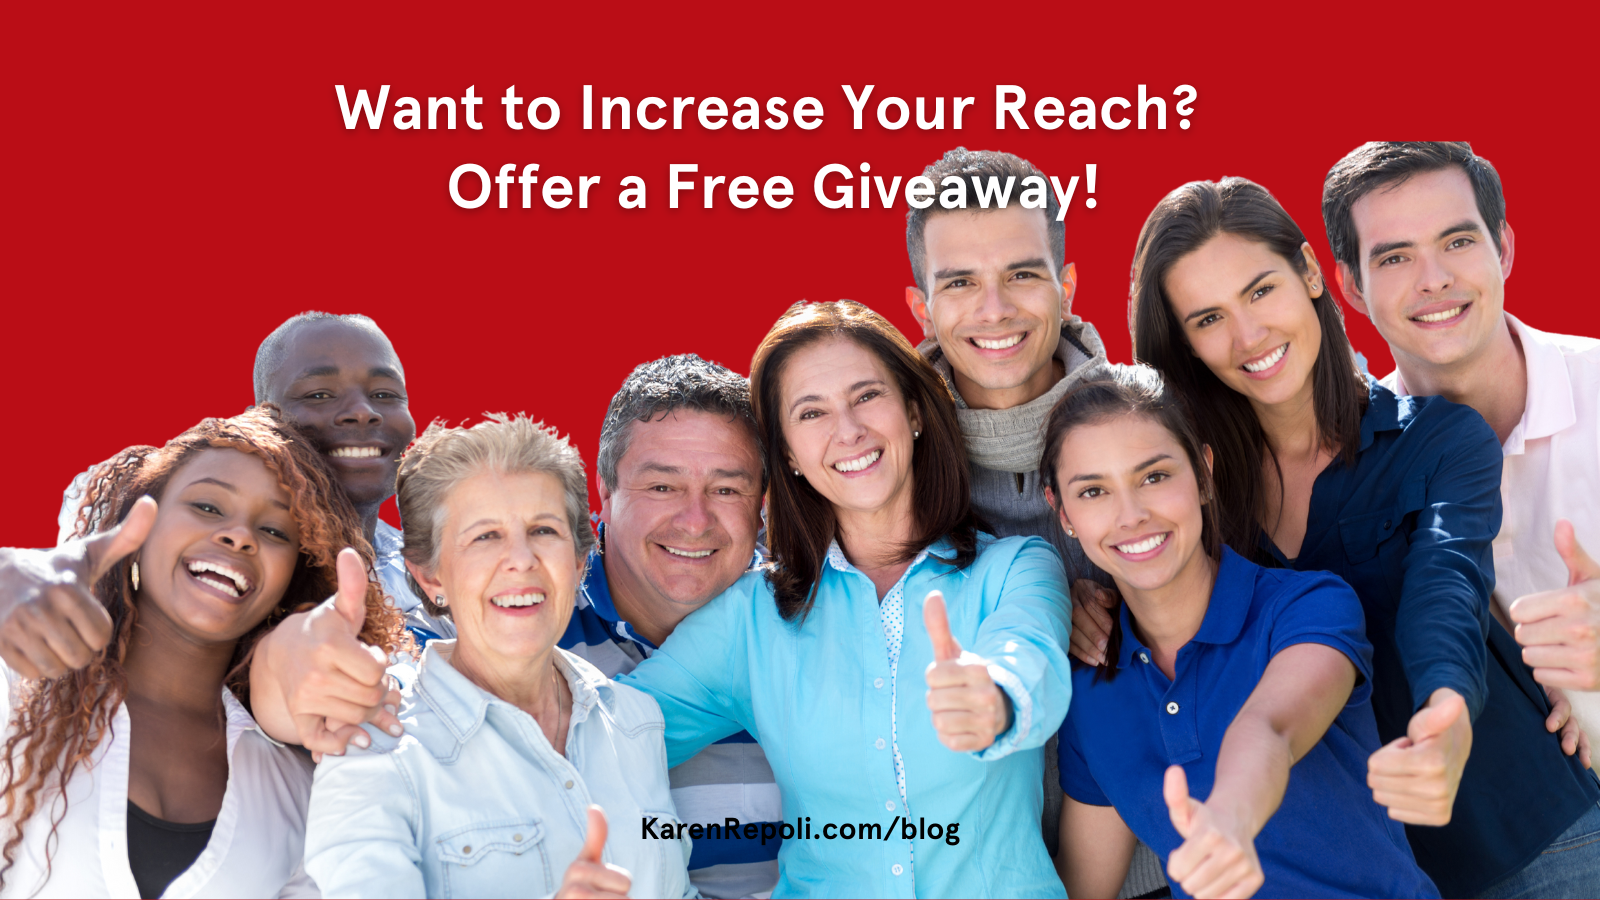 Want to Increase Your Reach? Offer a Free Giveaway!